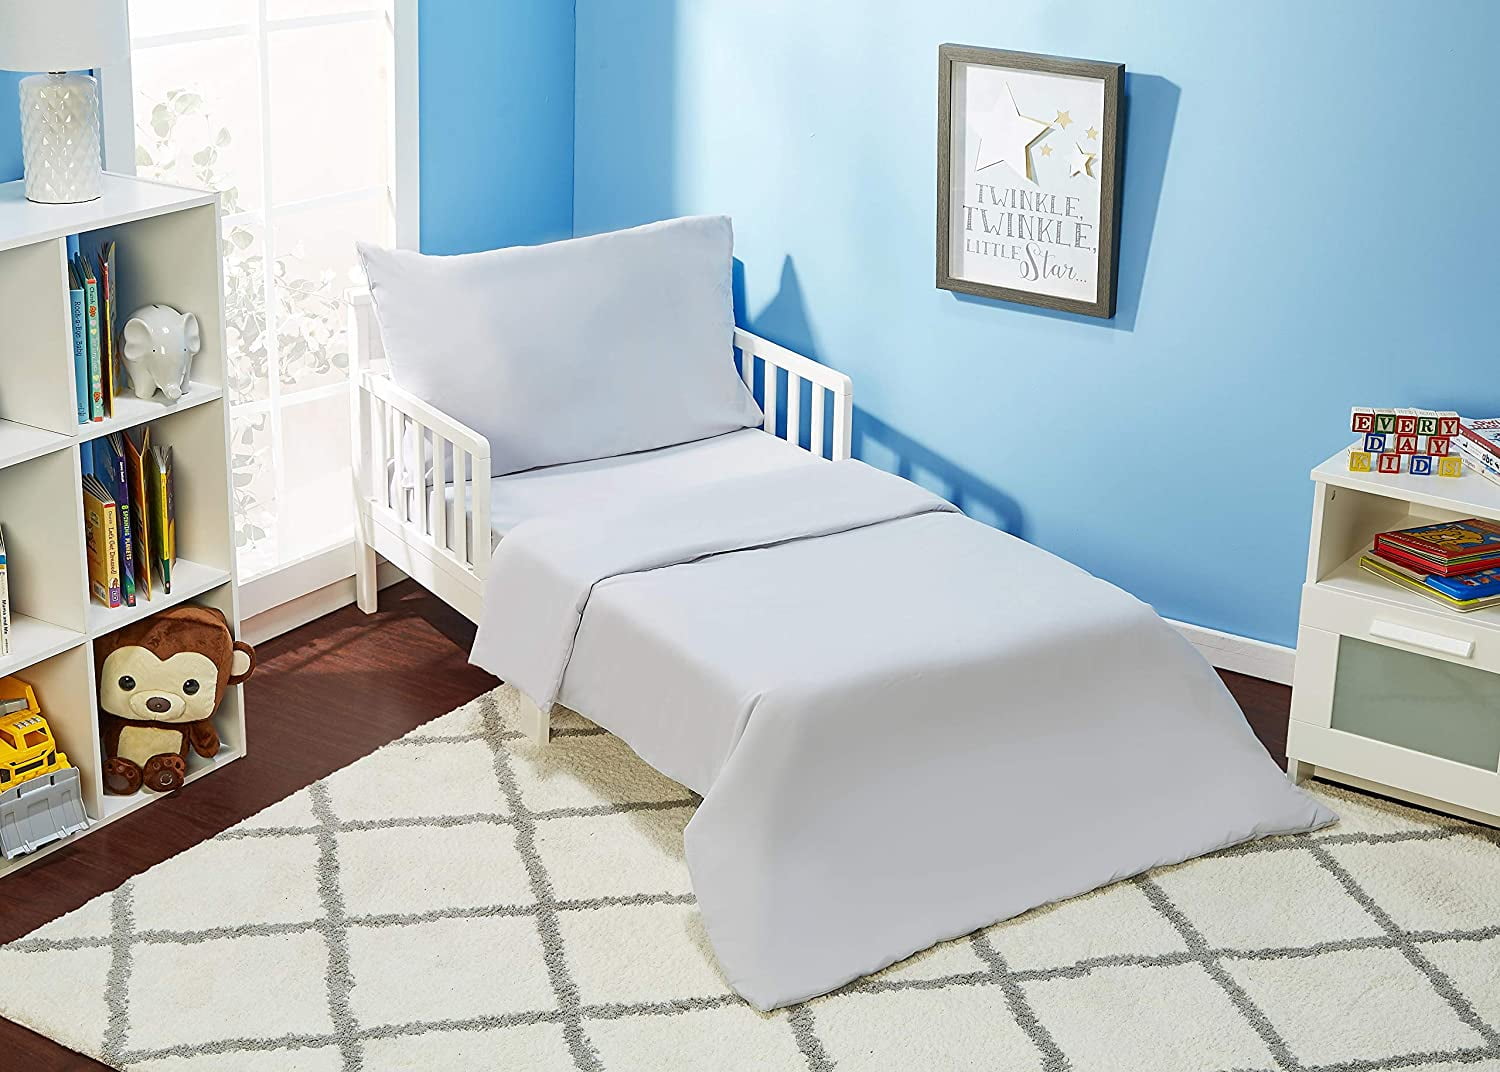 EVERYDAY KIDS 4 Piece Toddler Bedding Set Includes Comfor Under Construction 